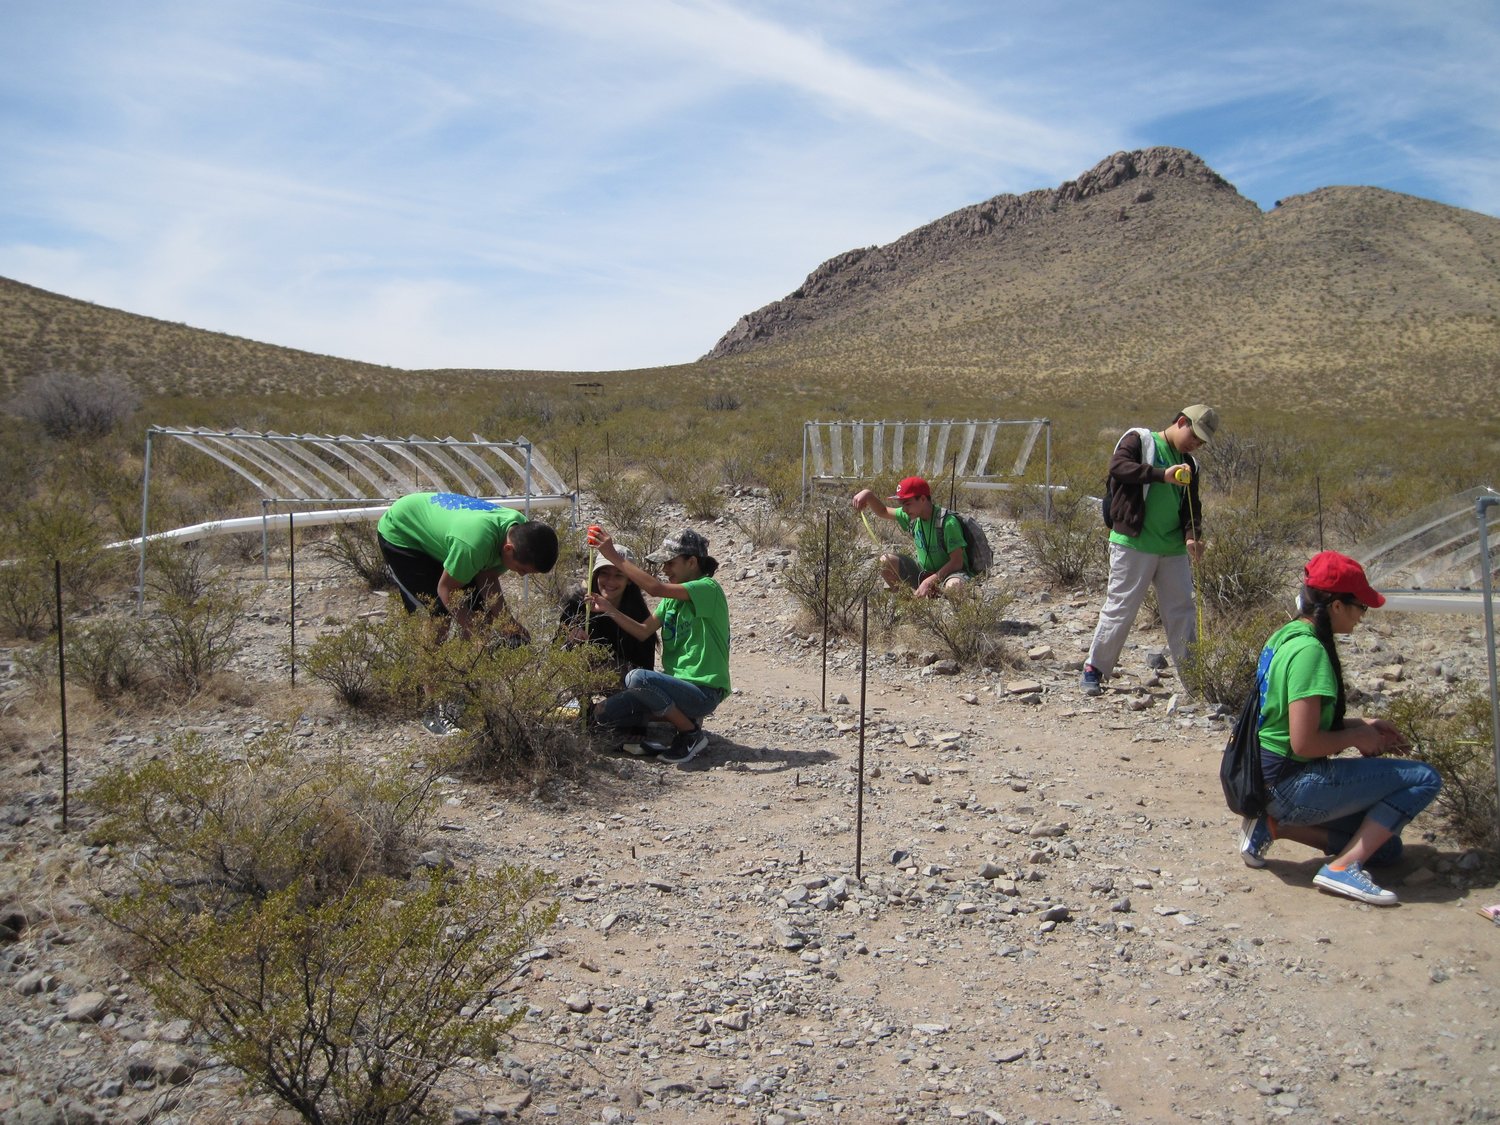 Students on a field trip at the Chihuahuan Desert Nature Park, where they collect and interpret data to learn more about desert ecology and local research projects.